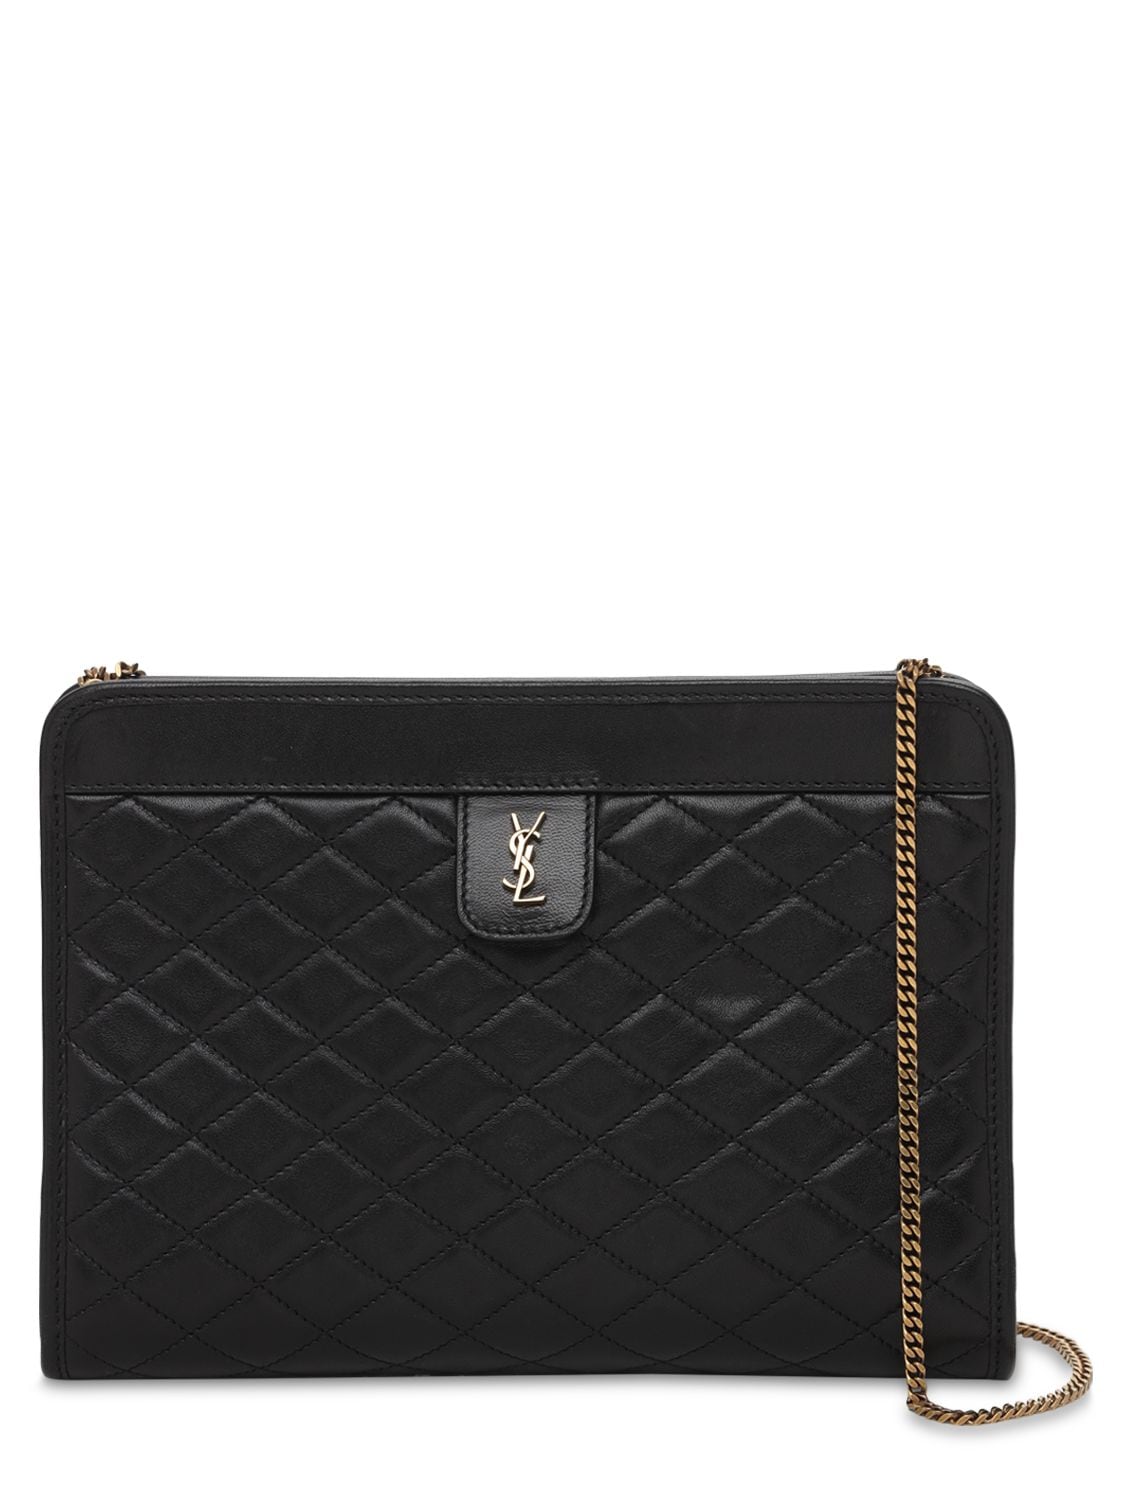 SAINT LAURENT VICTOIRE BABY QUILTED LEATHER CLUTCH,73IG1N054-MTAWMA2